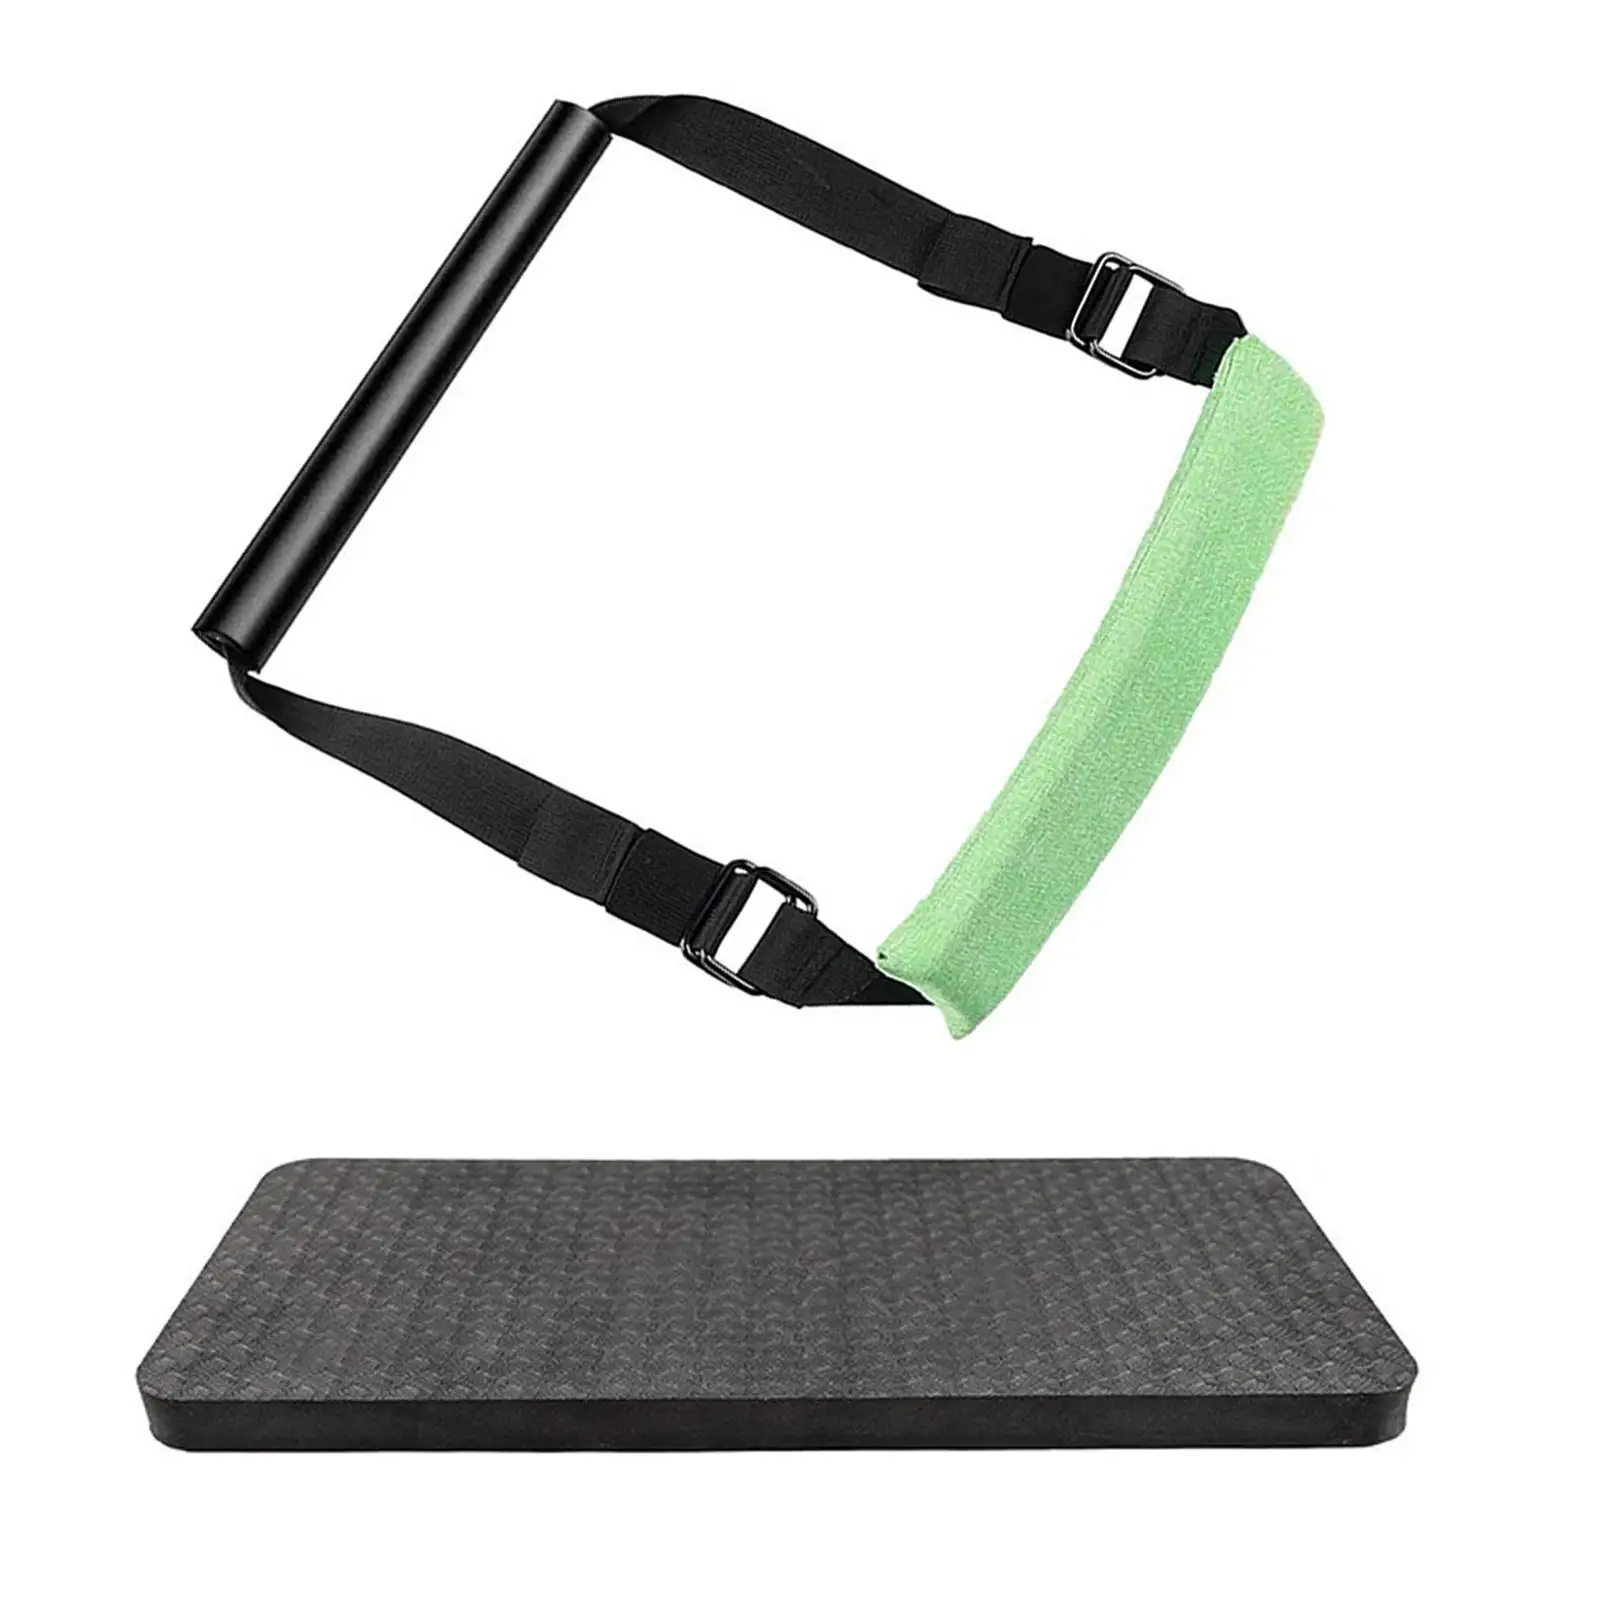 Hamstring Curl Strap for Door Anchor Abdominal Padded Foot Holder for Workout Unisex Adults Home Gym Fitness Strength Training